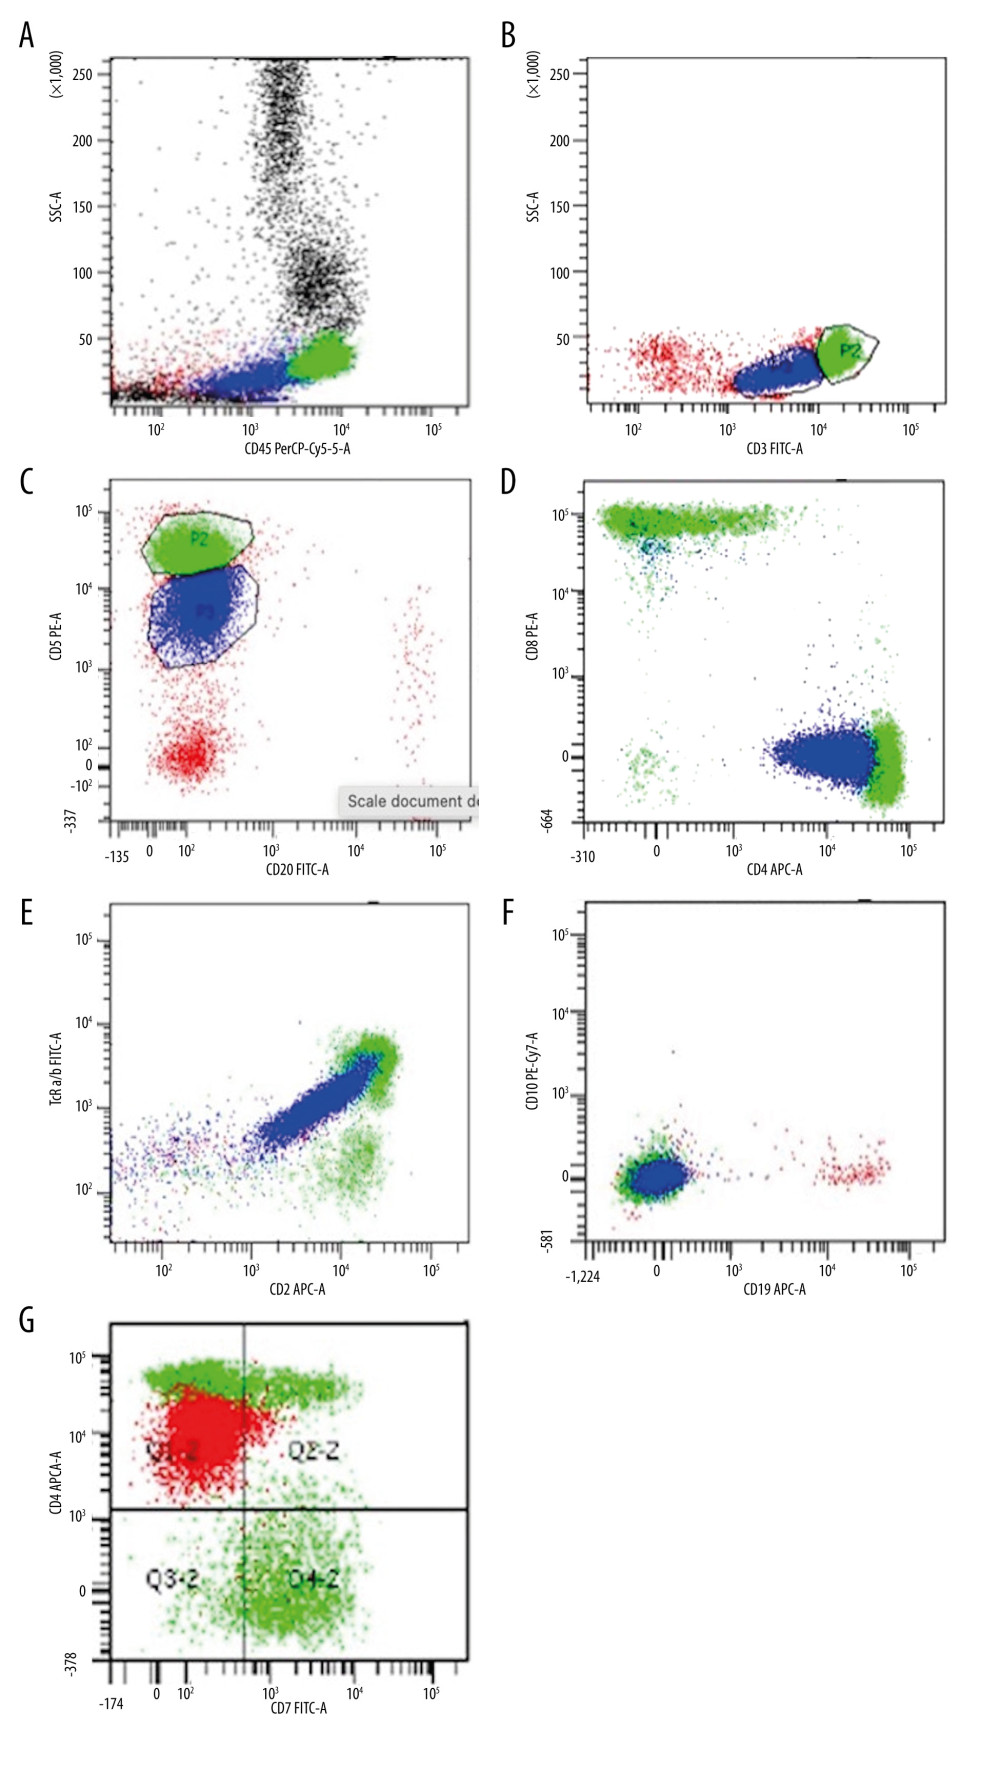 (A–G) Multiparameter flow cytometry (MFC) scattergram of the peripheral blood showing the immunophenotype of the lymphoma cells (the population seen in royal blue in all plots and in red in the last plot) which are positive for CD45, CD3, CD5, CD4, and CD2 but in a dimmer expression than the normal T lymphocytes (bright green population). In addition, they are positive for TCR a/b and show aberrant loss of CD7 (last plot). CD10, CD19, and CD20 are negative. SS – side scatter; APC – allophycocyanin; FITC – fluorescein isothiocyanate; PE – phycoerythrin; PE-Cy7 – phycoerythrin-cyanin5; PerCP-Cy5 – peridinin chlorophyll protein complex-cyanine 5.